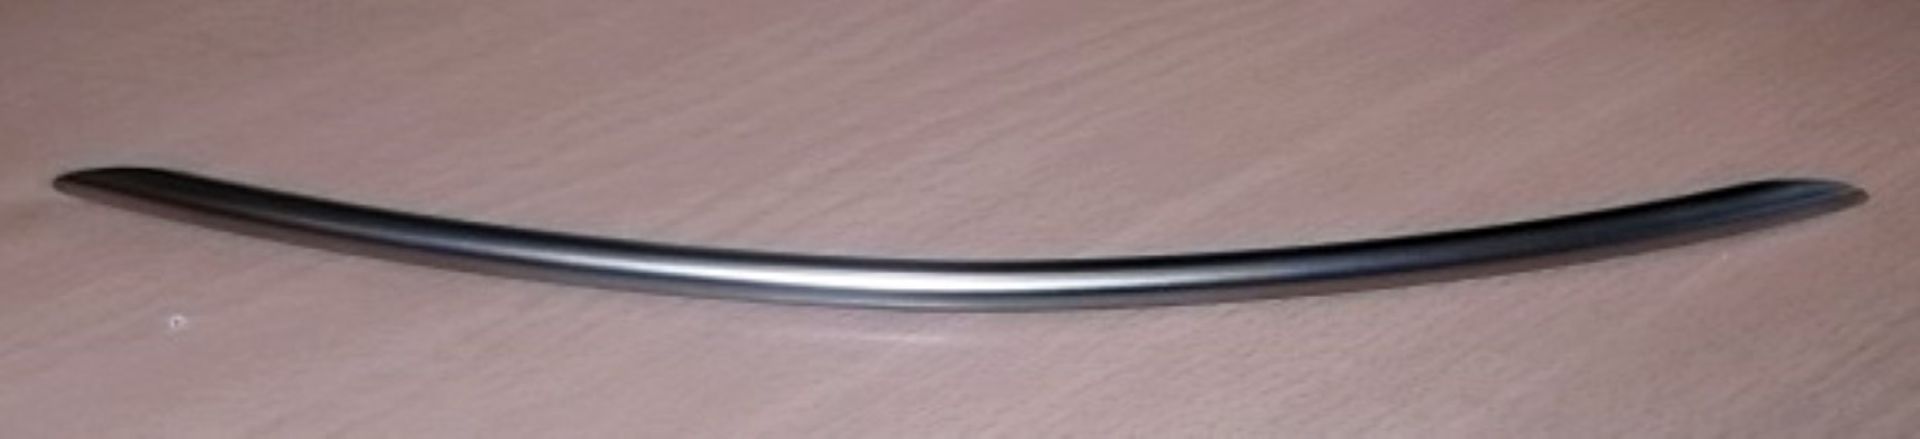 50 x BOW Handle Kitchen Door Handles - 320mm - New Stock - Brushed Nickel Finish - Fixings Included - Image 4 of 20